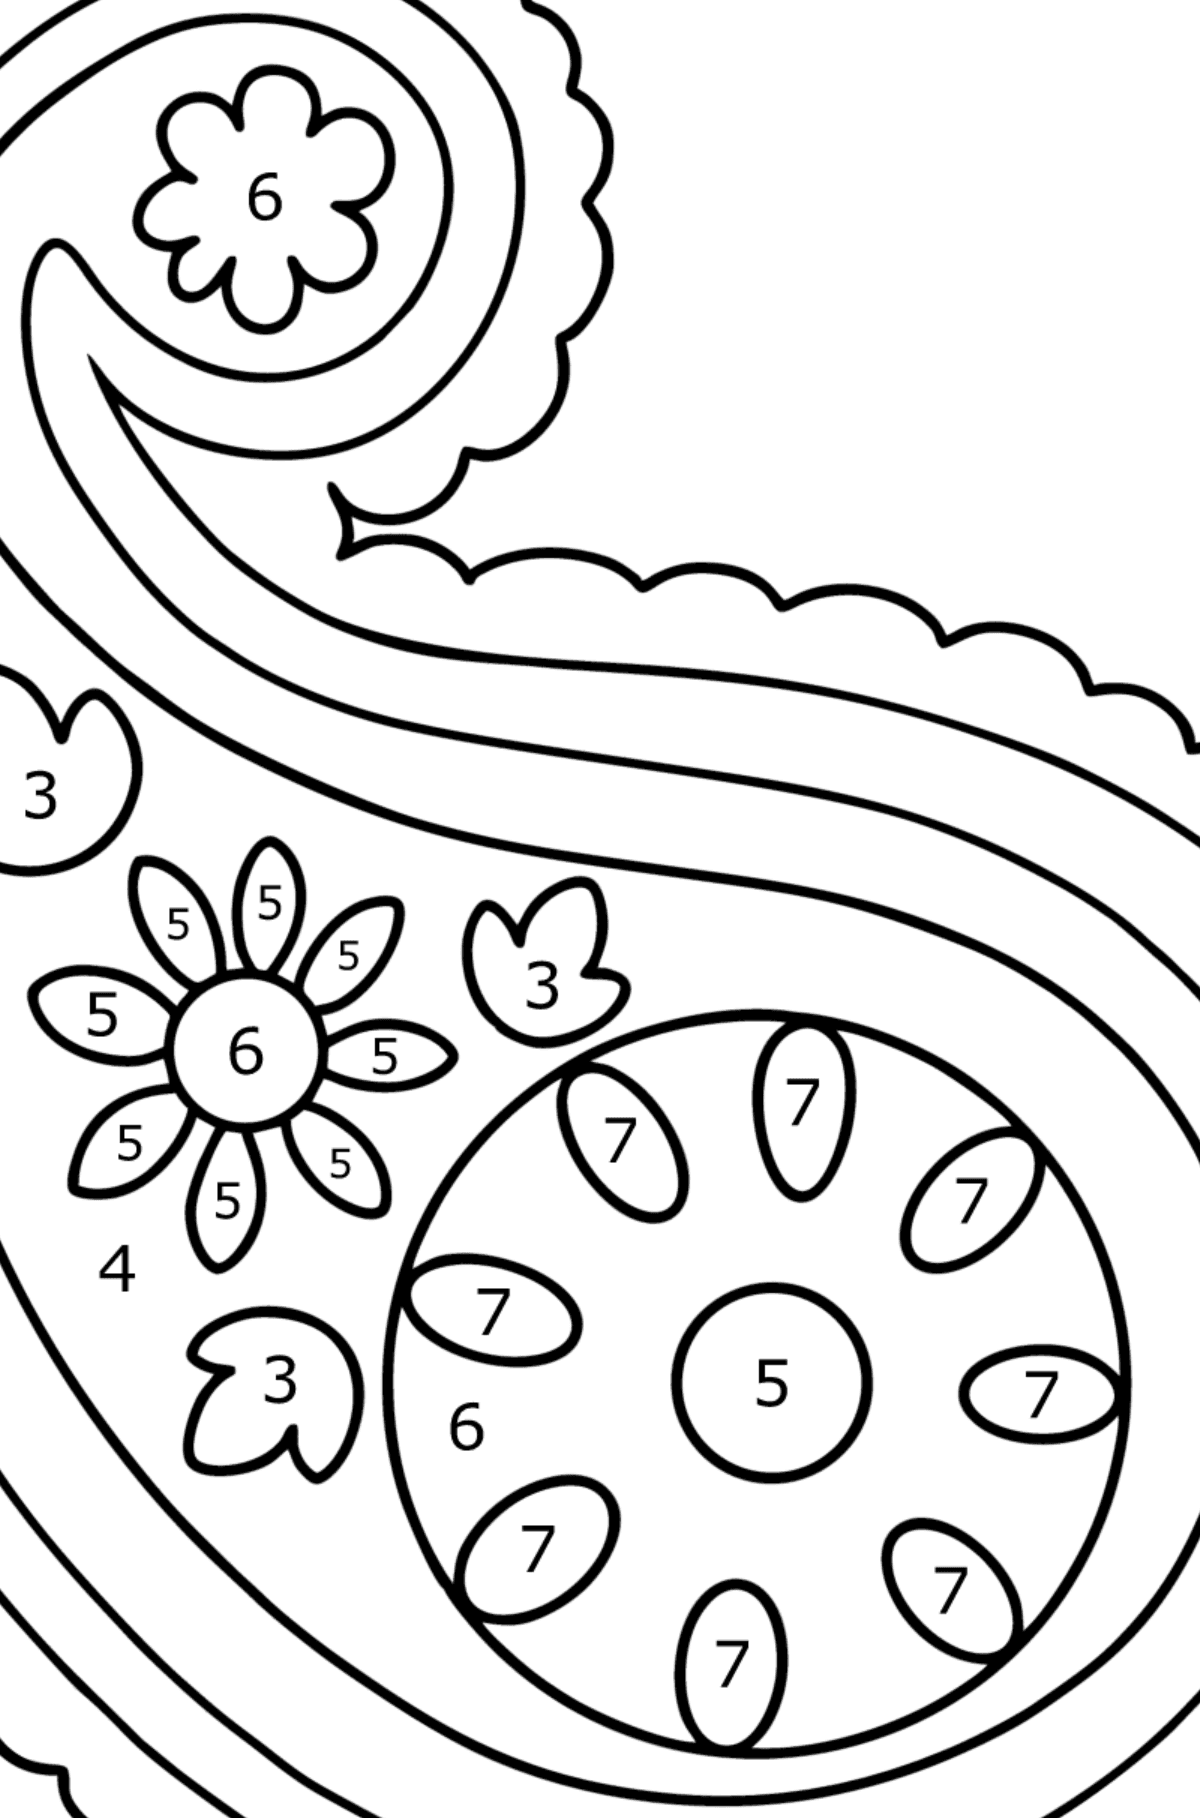 Cute Paisley coloring page - Coloring by Numbers for Kids